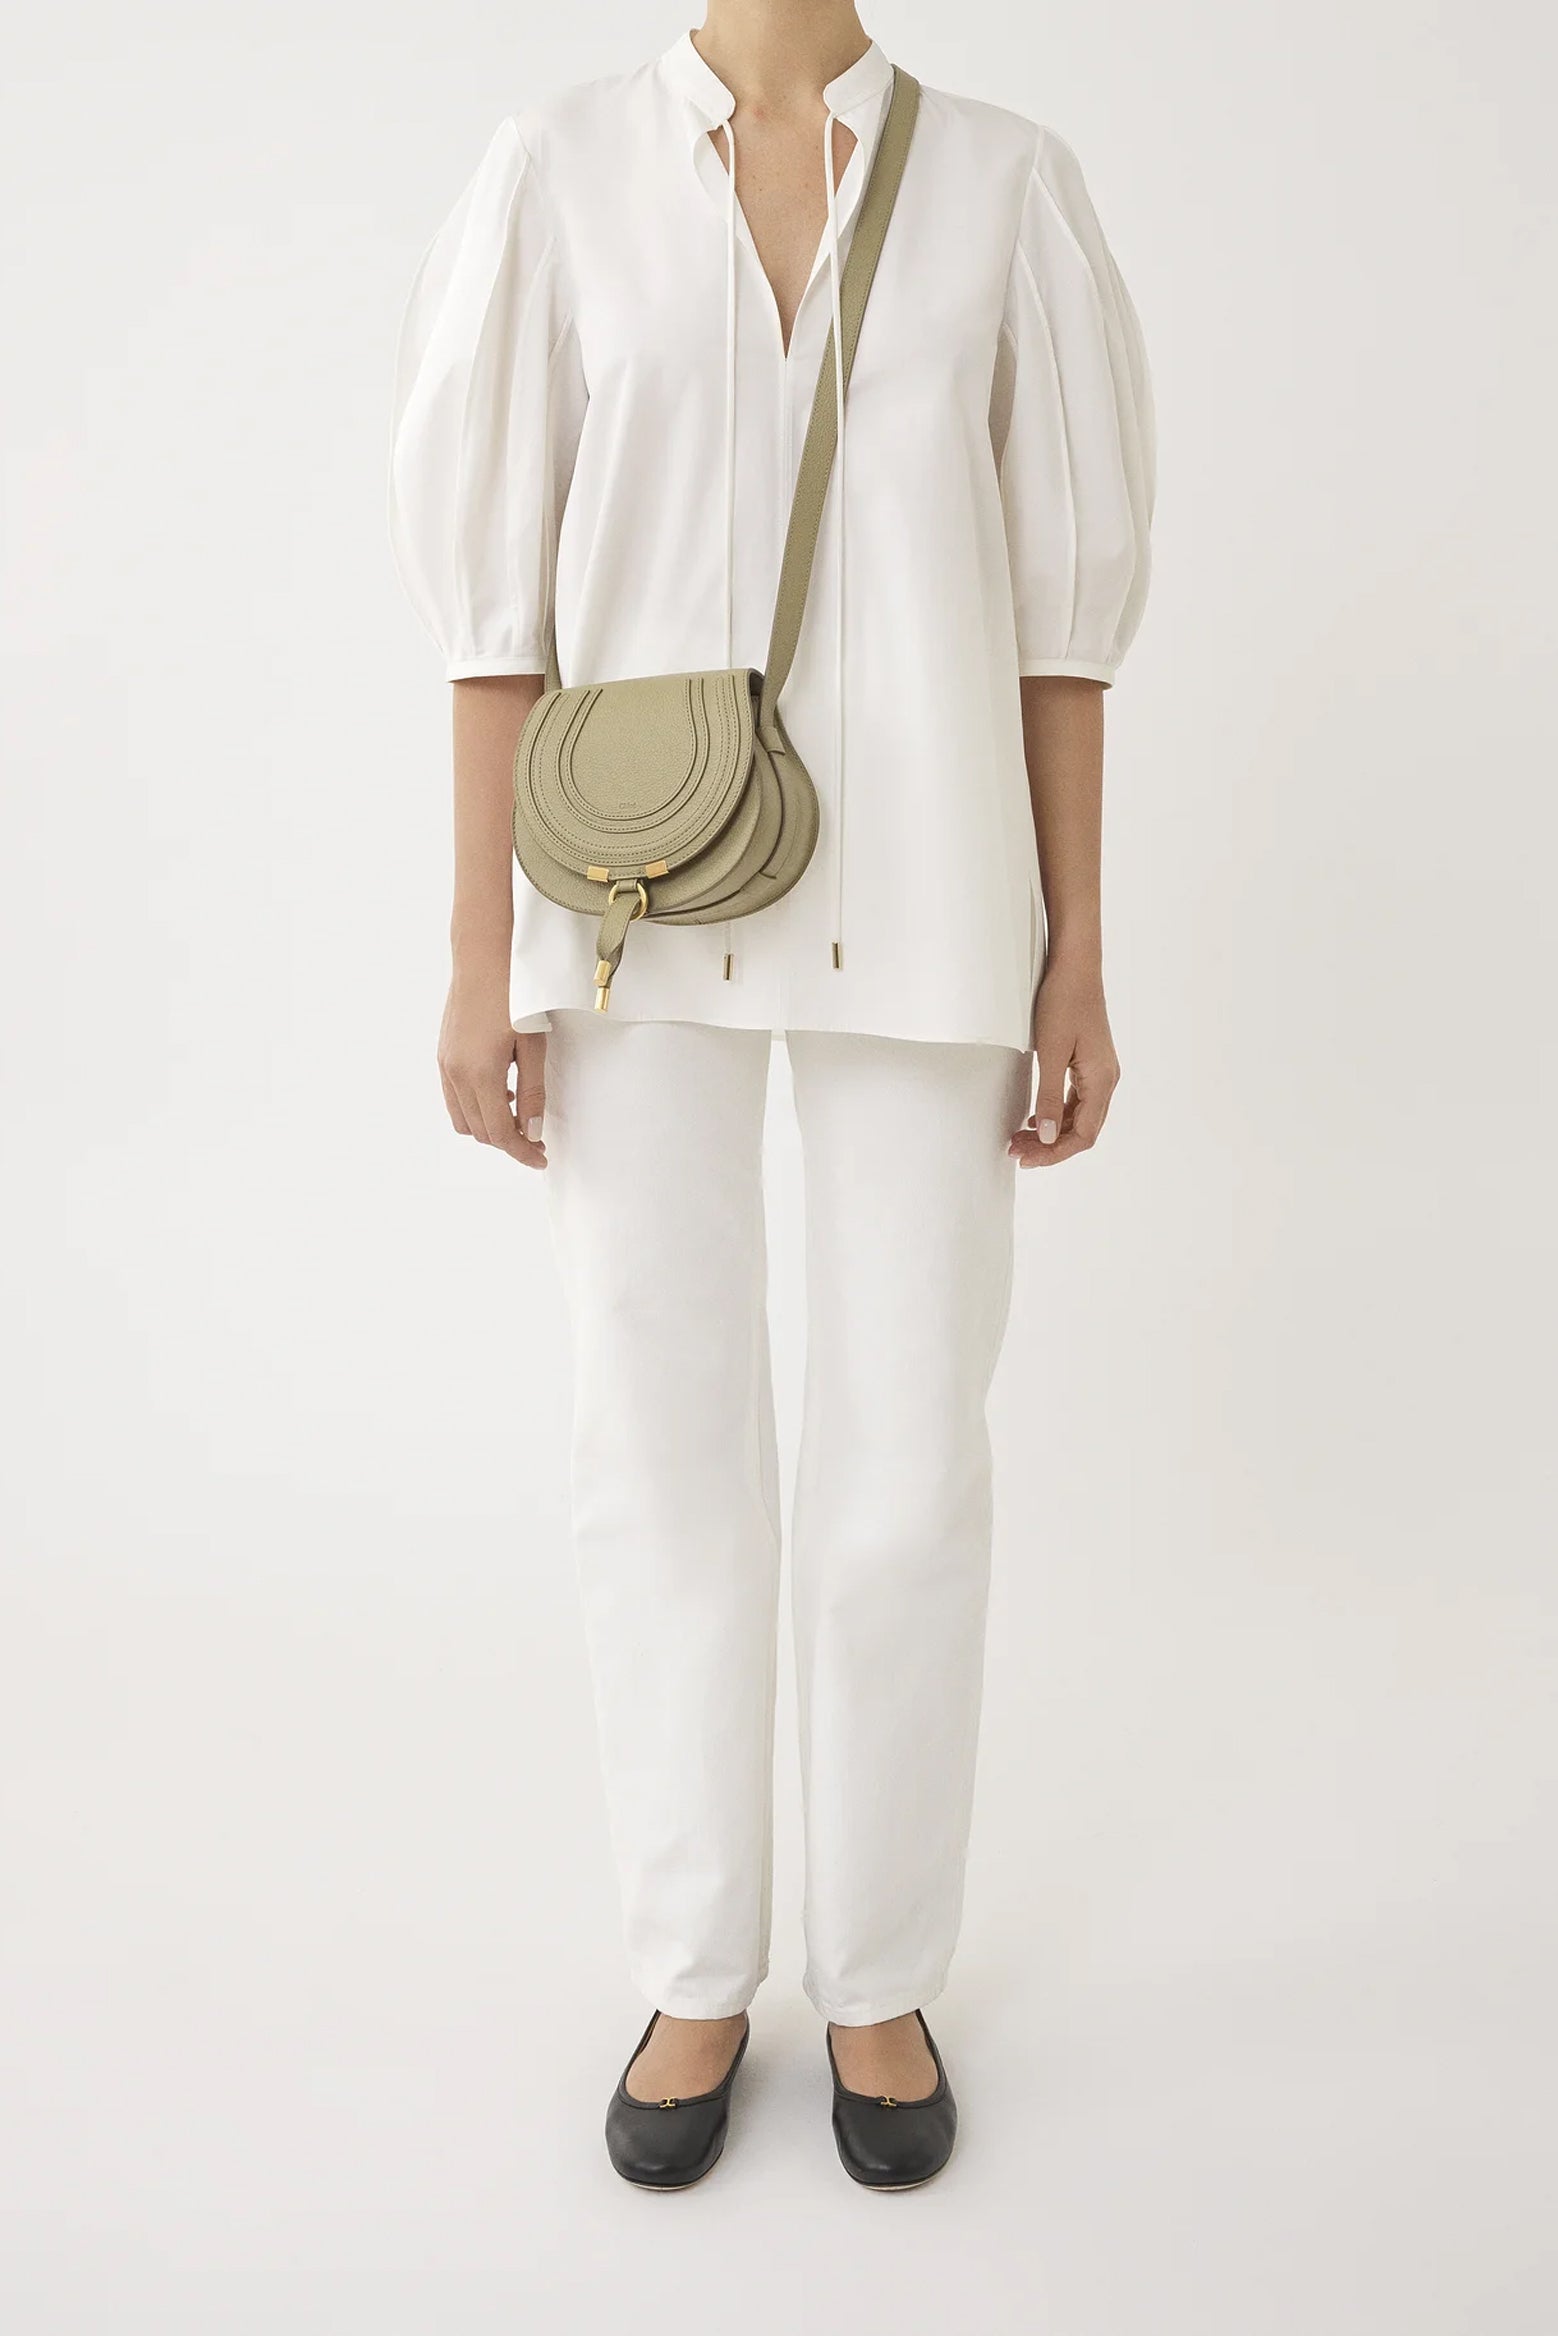 Chloé Marcie Small Saddle Bag in Pottery Green available at The New Trend Australia.